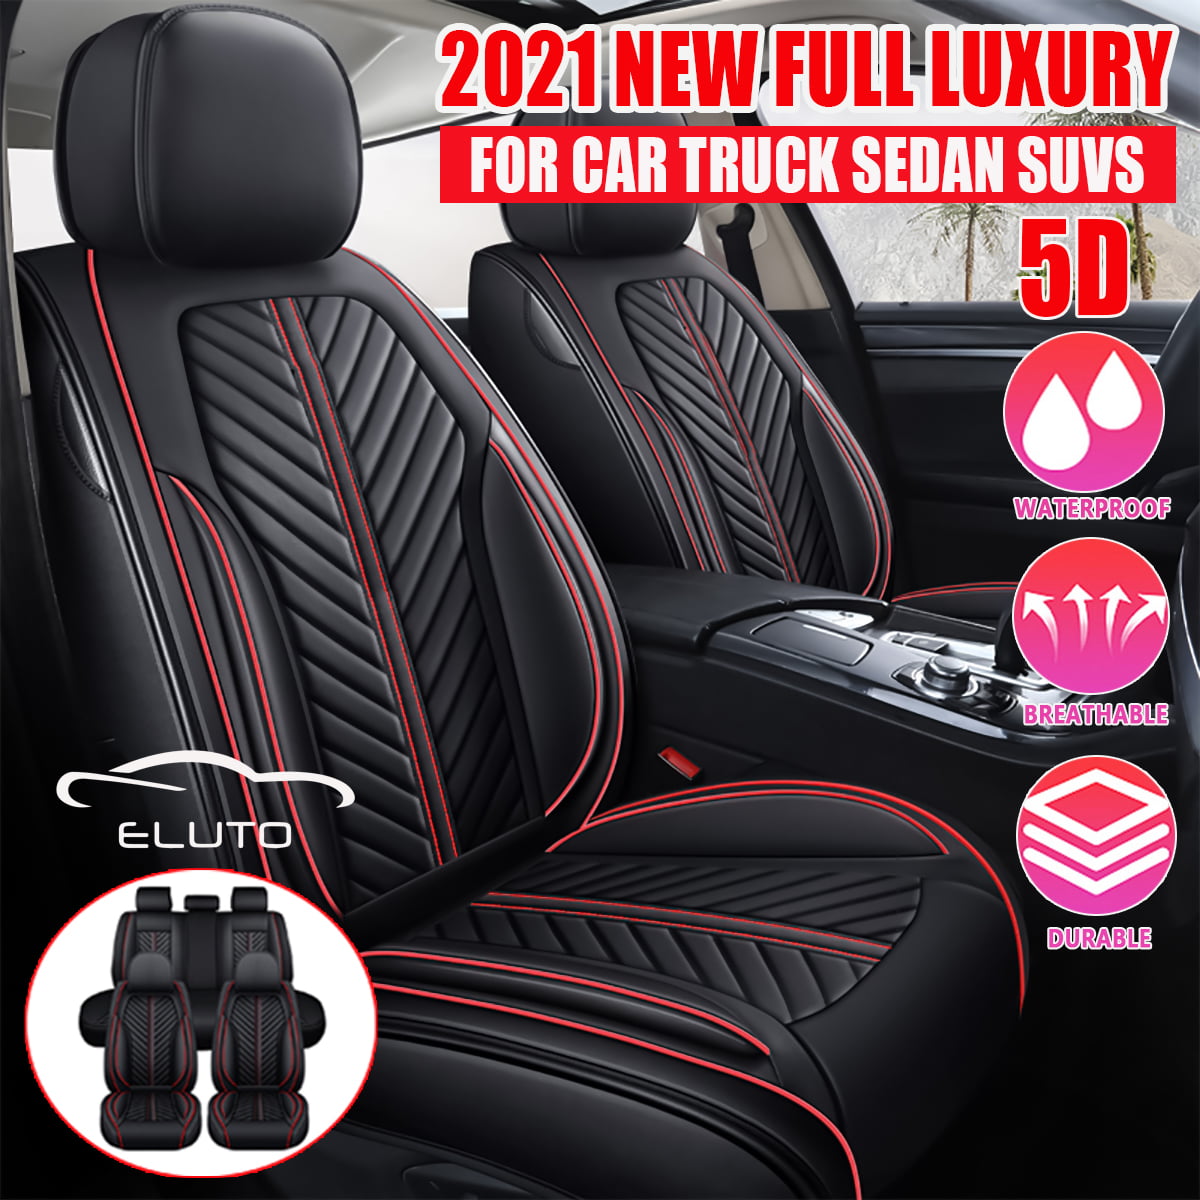 Interior Pro Universal Car Seat Cover Set  Microfiber Leather 5-Seat Protector